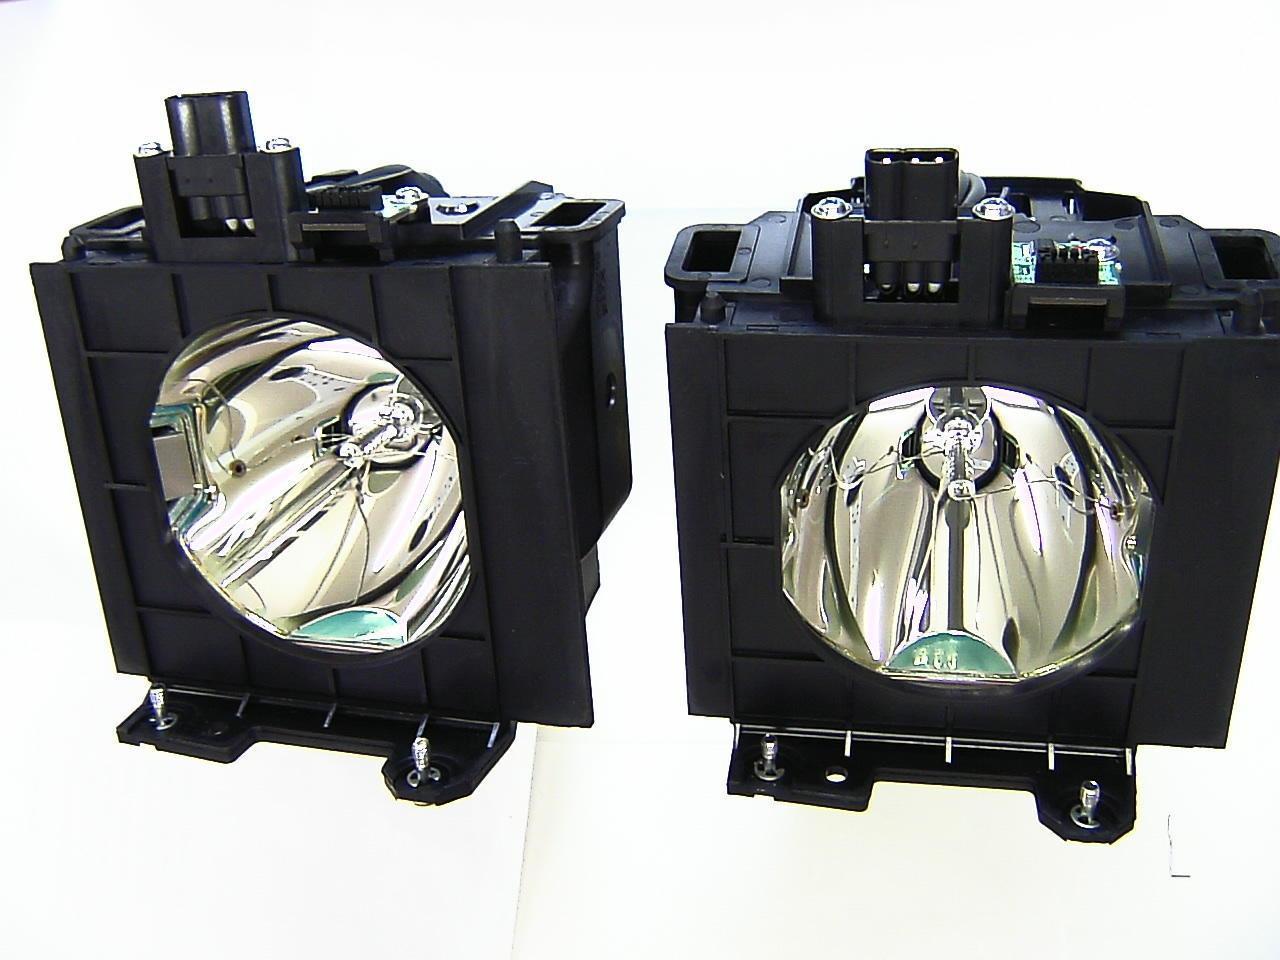 PT-D5700L Panasonic Twin-Pack Projector Lamp Replacement (contains two lamps). Projector Lamp Assembly with High Quality OEM Co